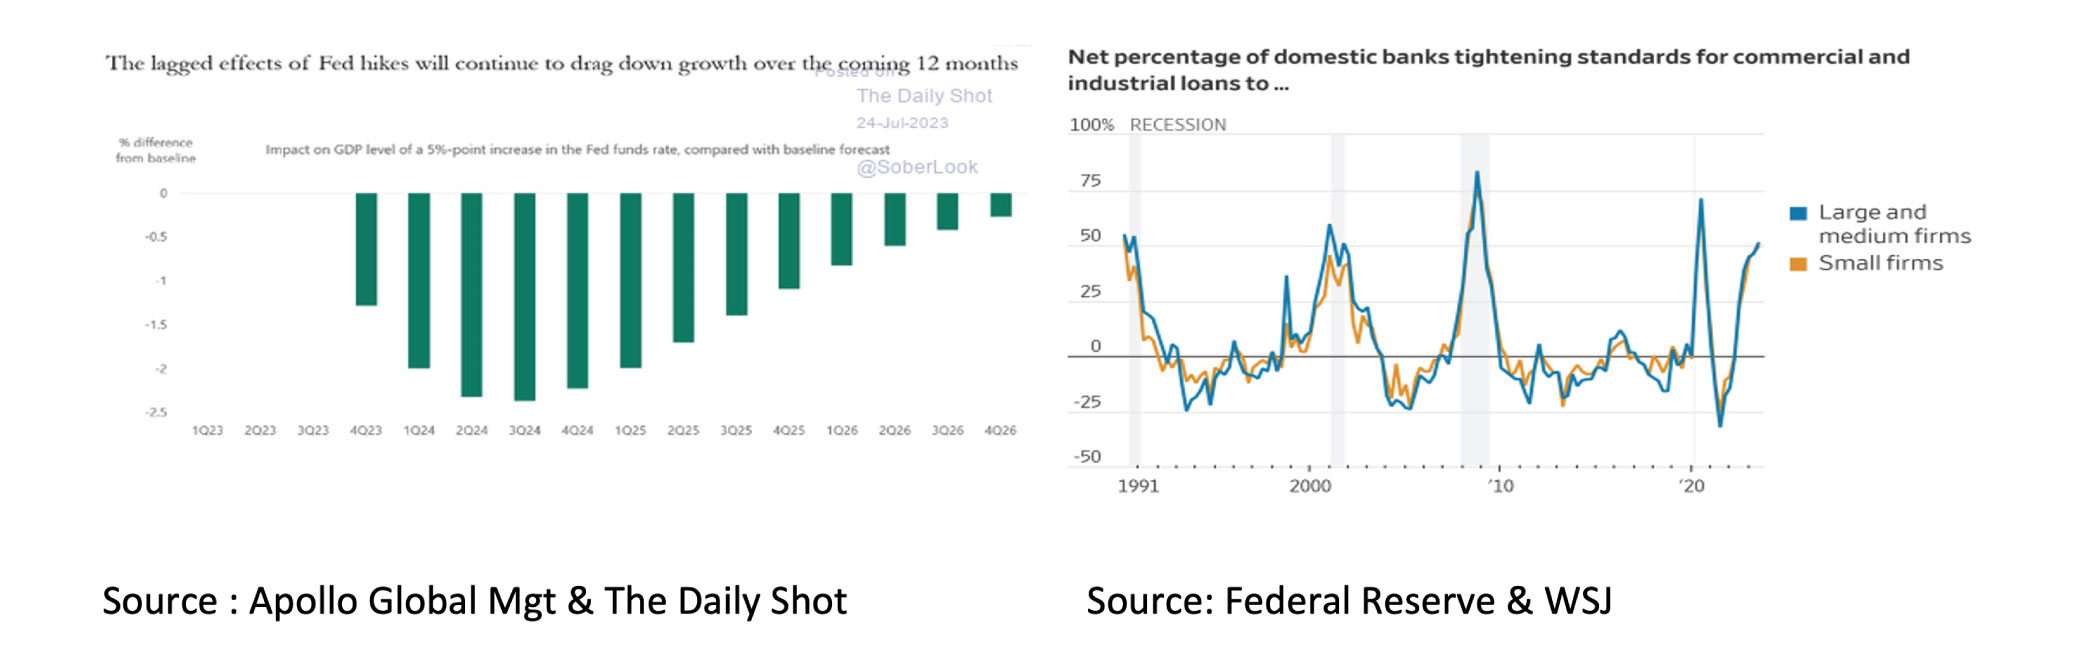 The lagged effects of Fed hikes